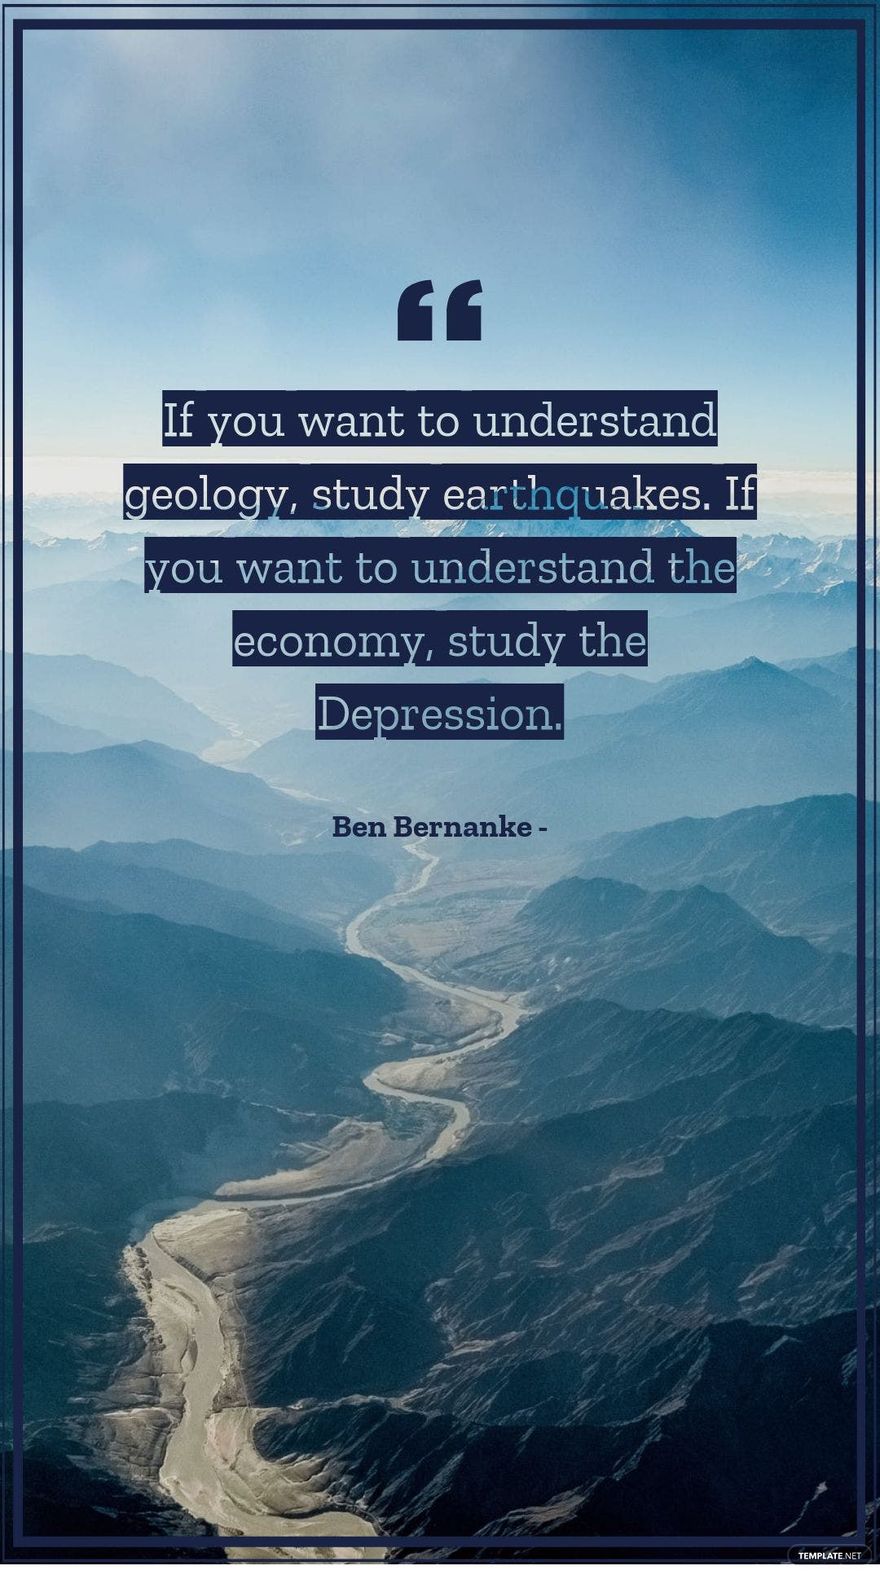 Ben Bernanke - If you want to understand geology, study earthquakes. If you want to understand the economy, study the Depression.